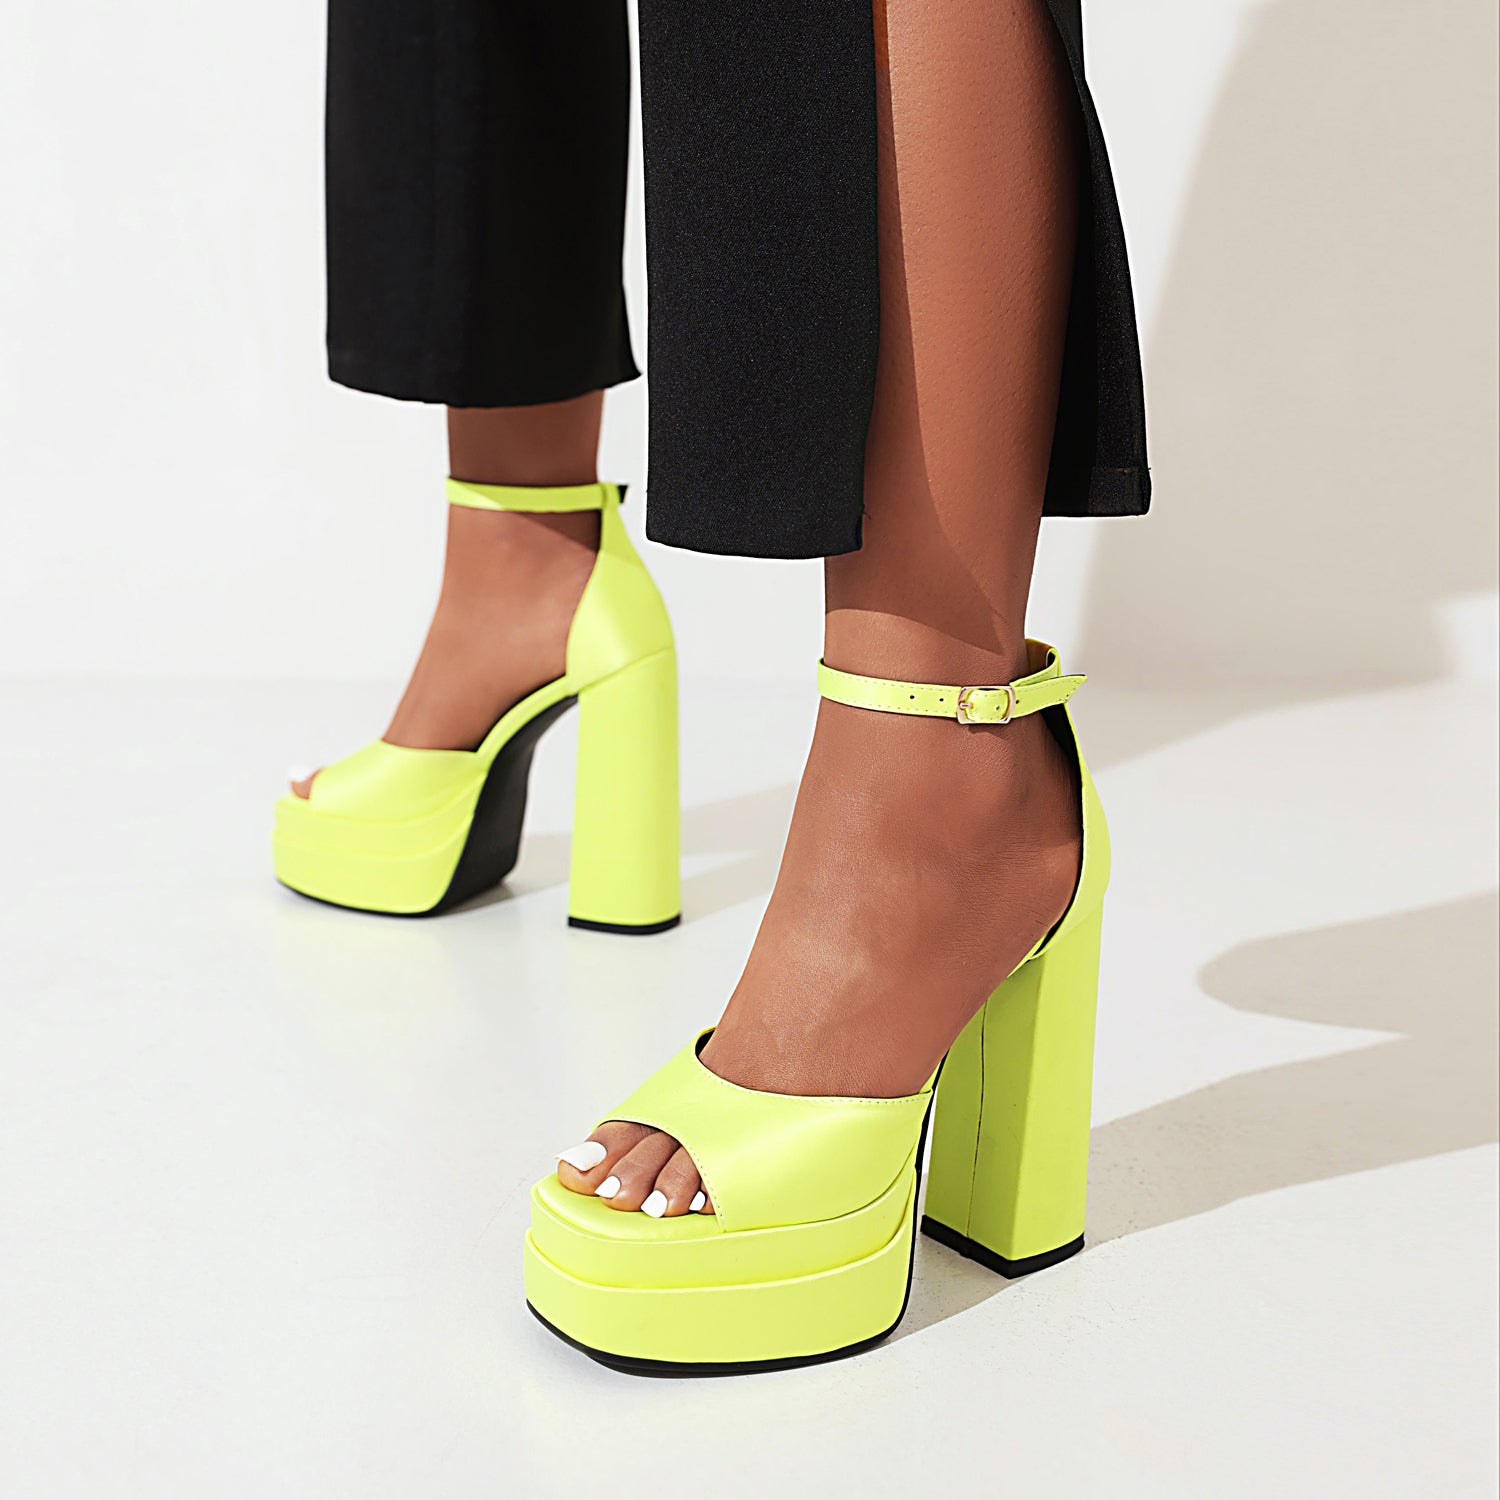 the Sexy Platform Ankle Strap Open Toe Sandals-Yellow best platform sandals are from bigsizeheels